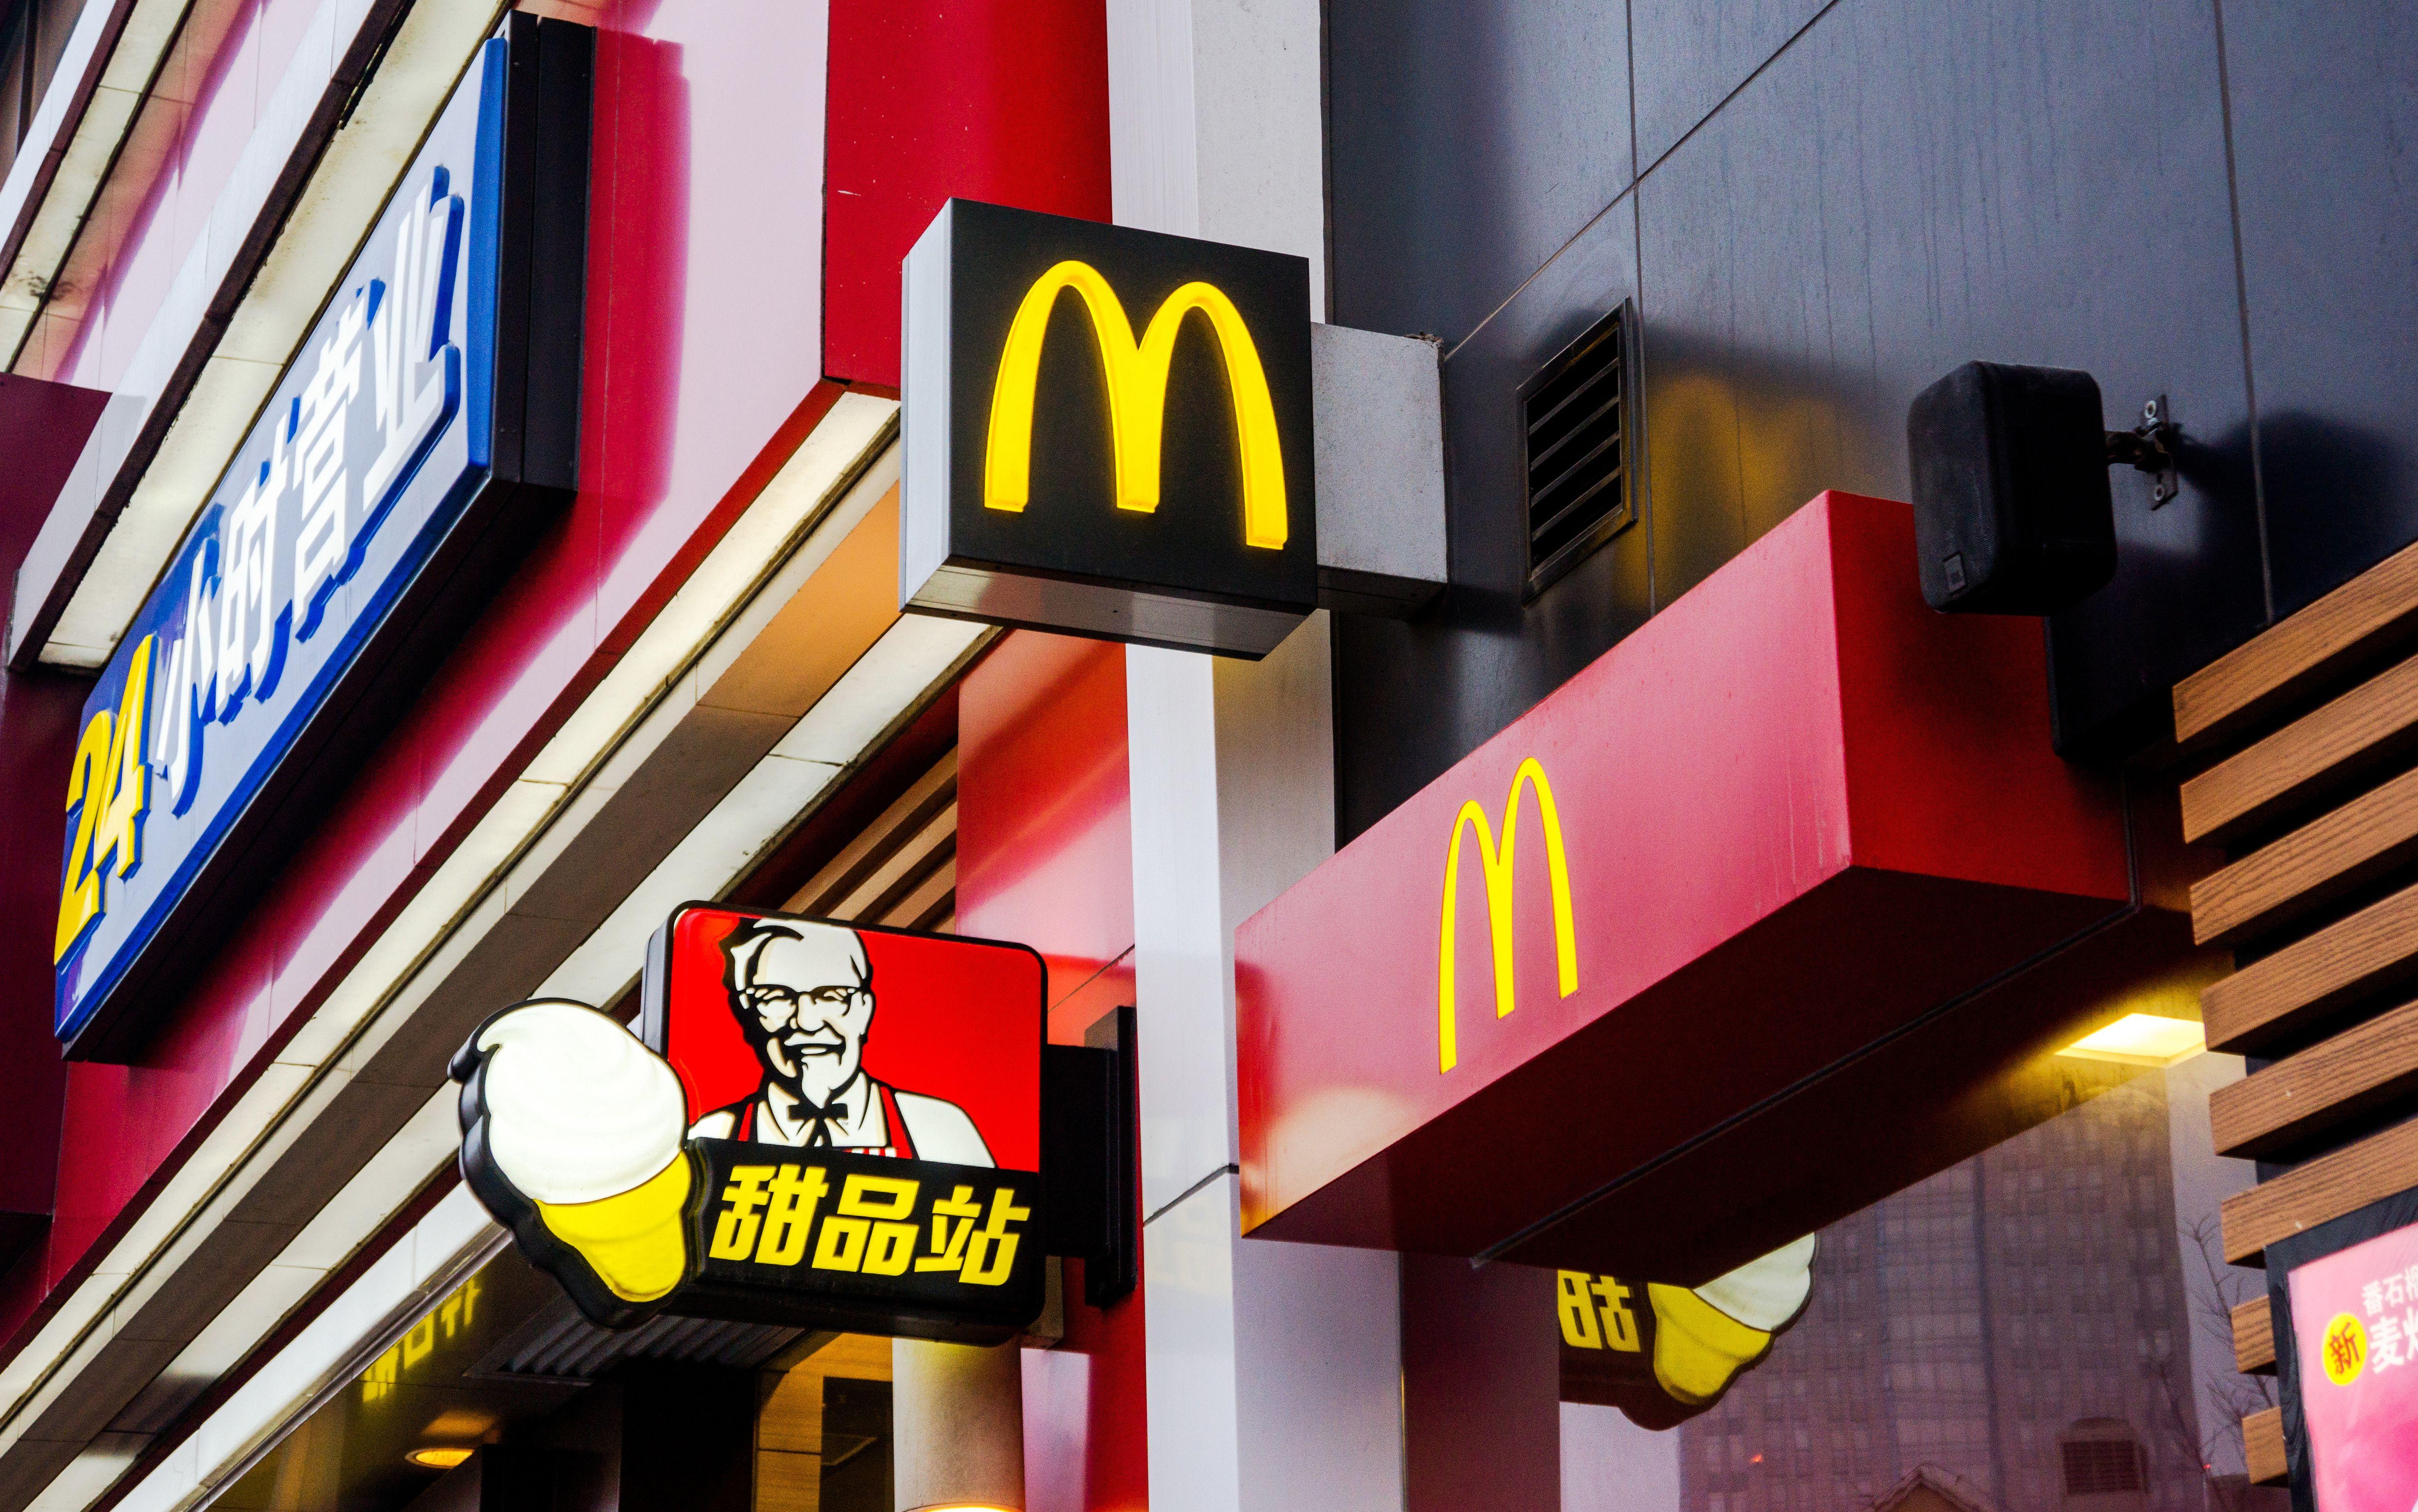 Chinese McDonald's Logo - China Food Scandal: Why Are Foreign Brands Coming Under Scrutiny?